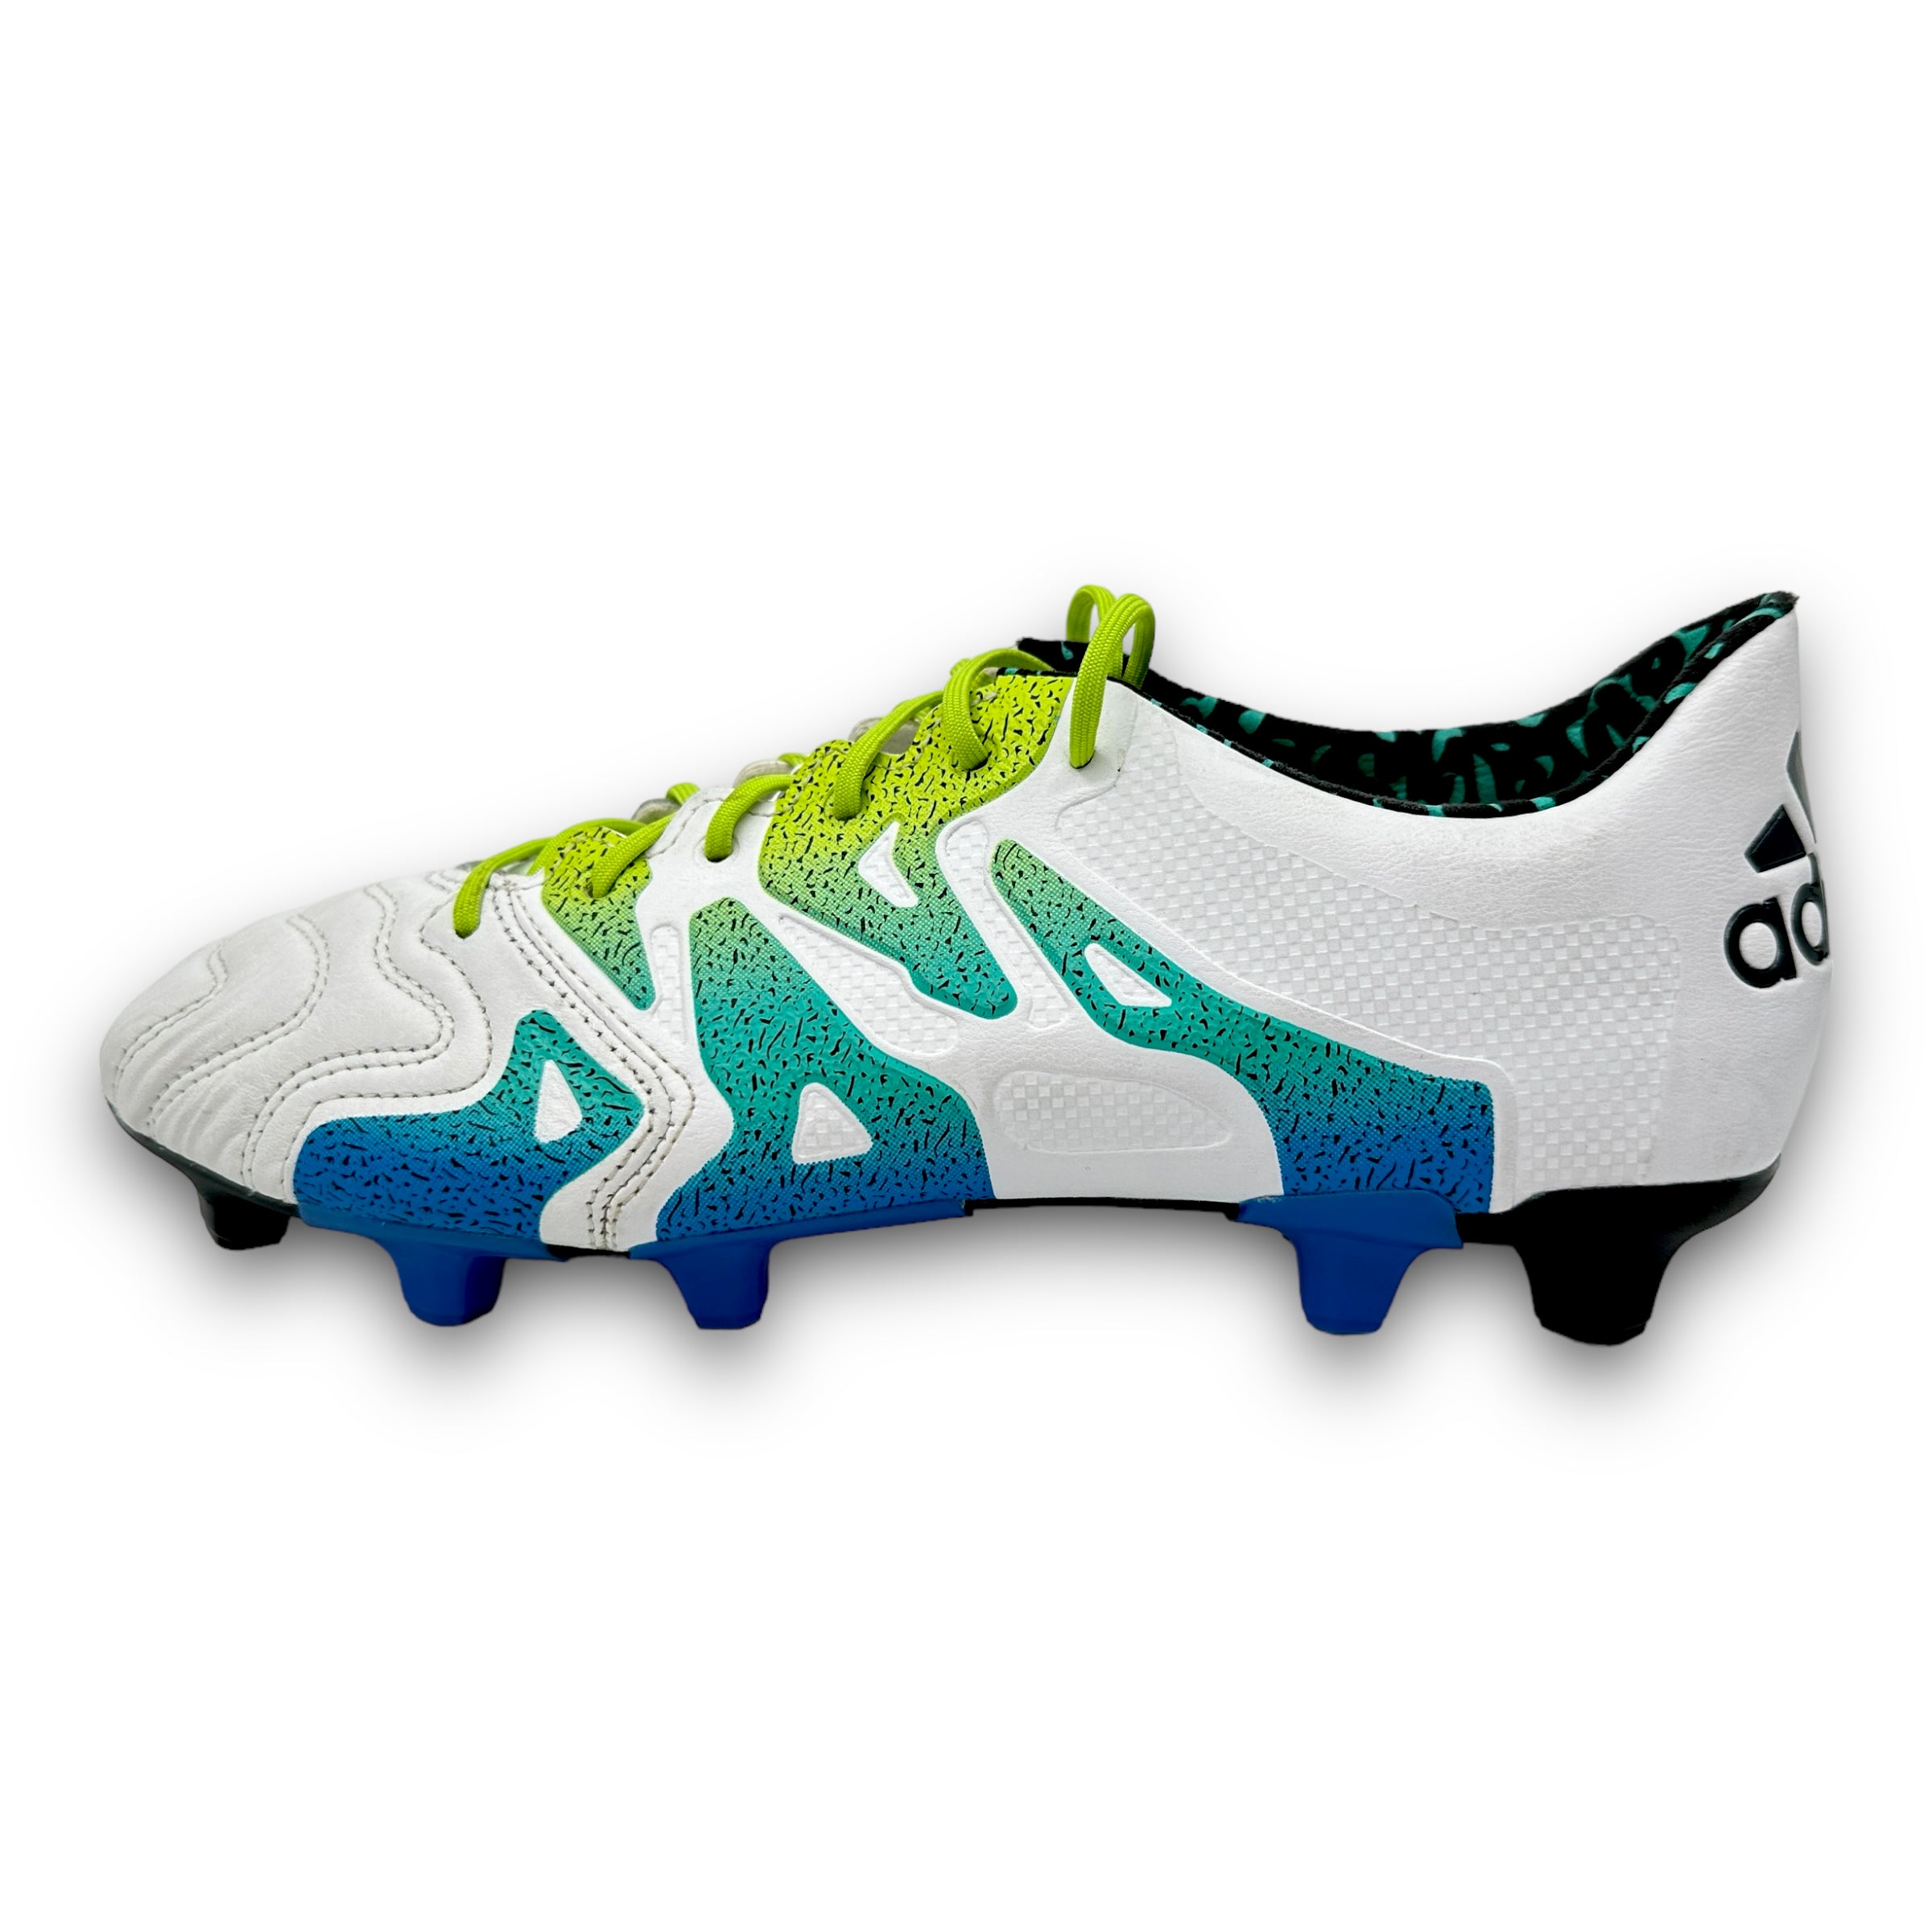 Adidas X 15.1 FG Leather - Athlete service - Made in Germany